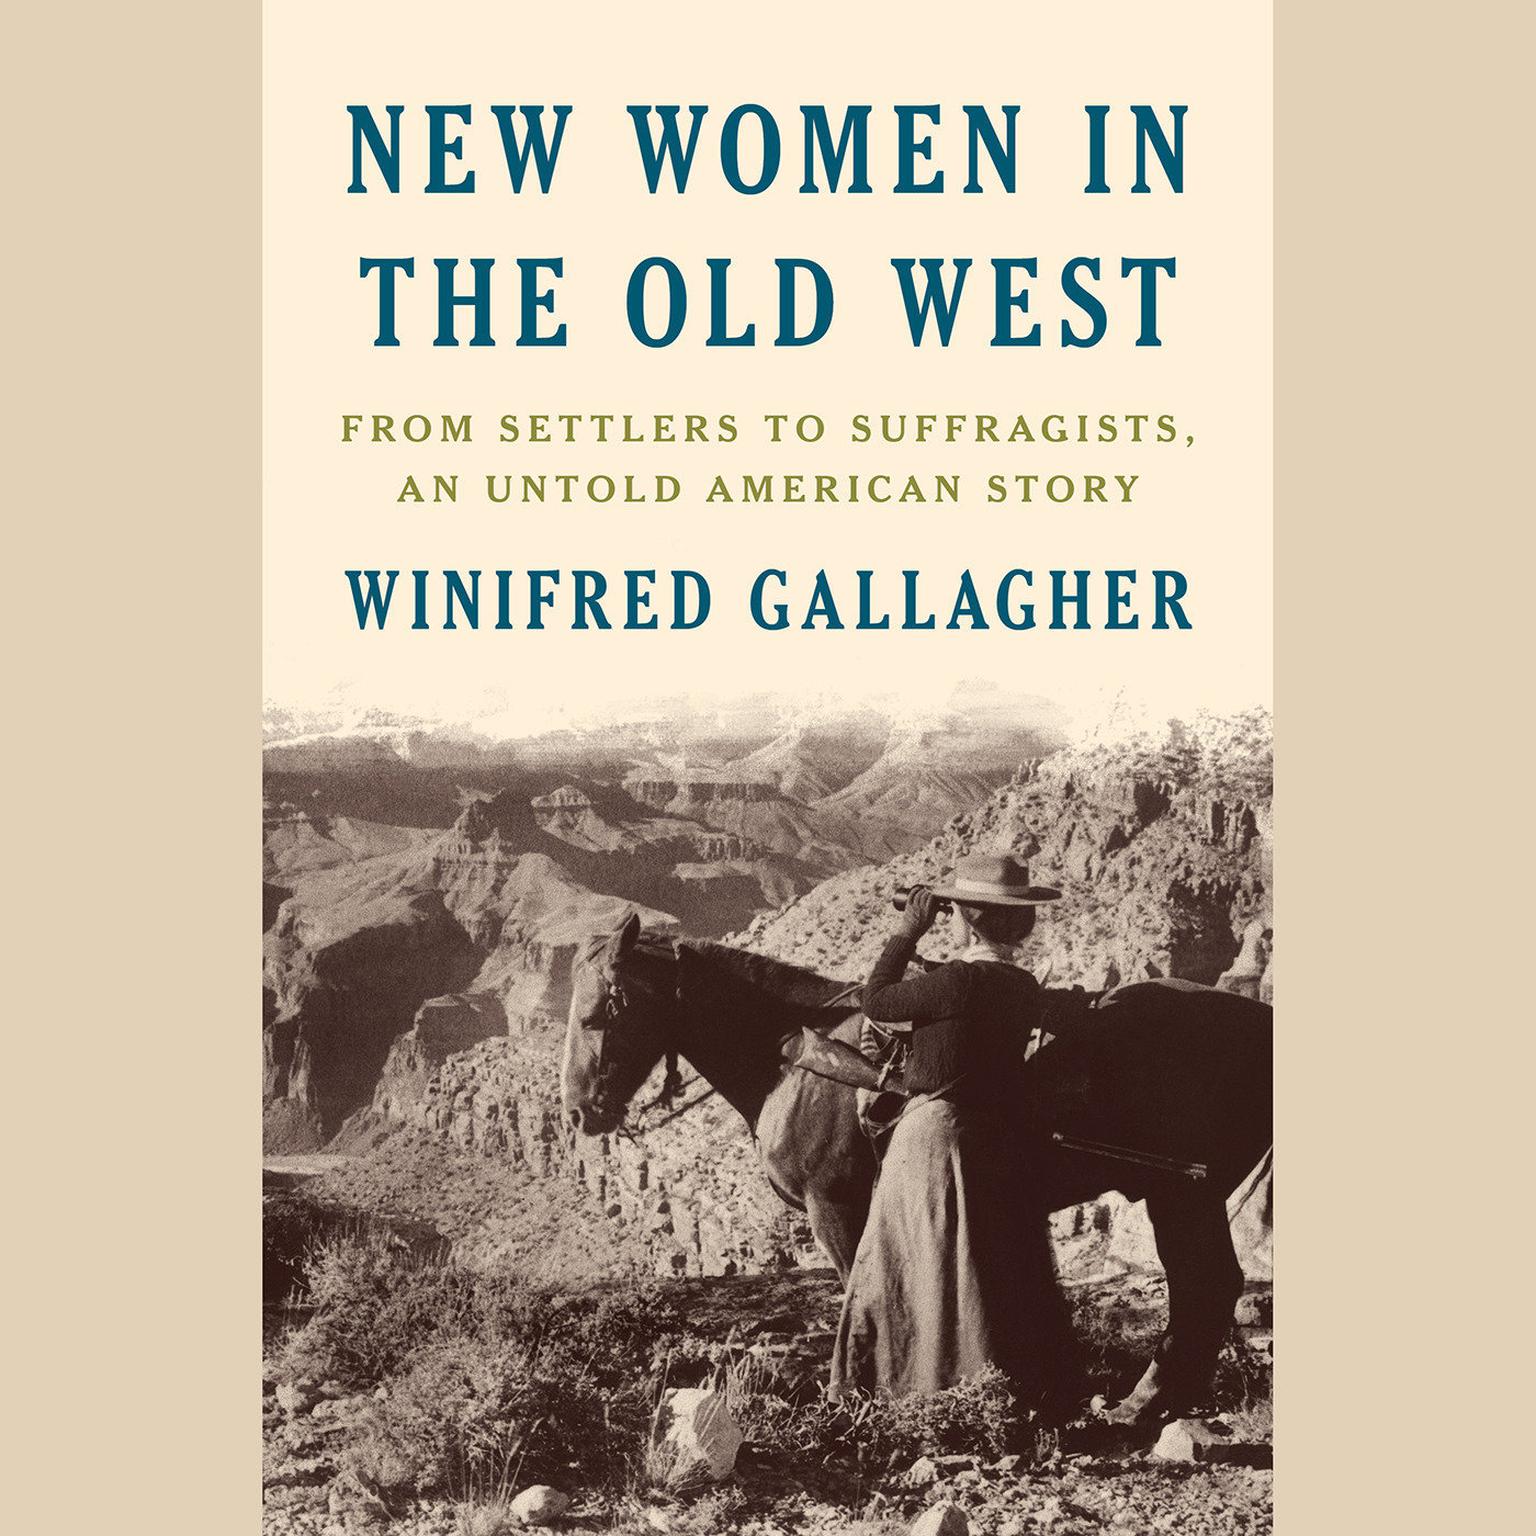 New Women in the Old West: From Settlers to Suffragists, an Untold American Story Audiobook, by Winifred Gallagher